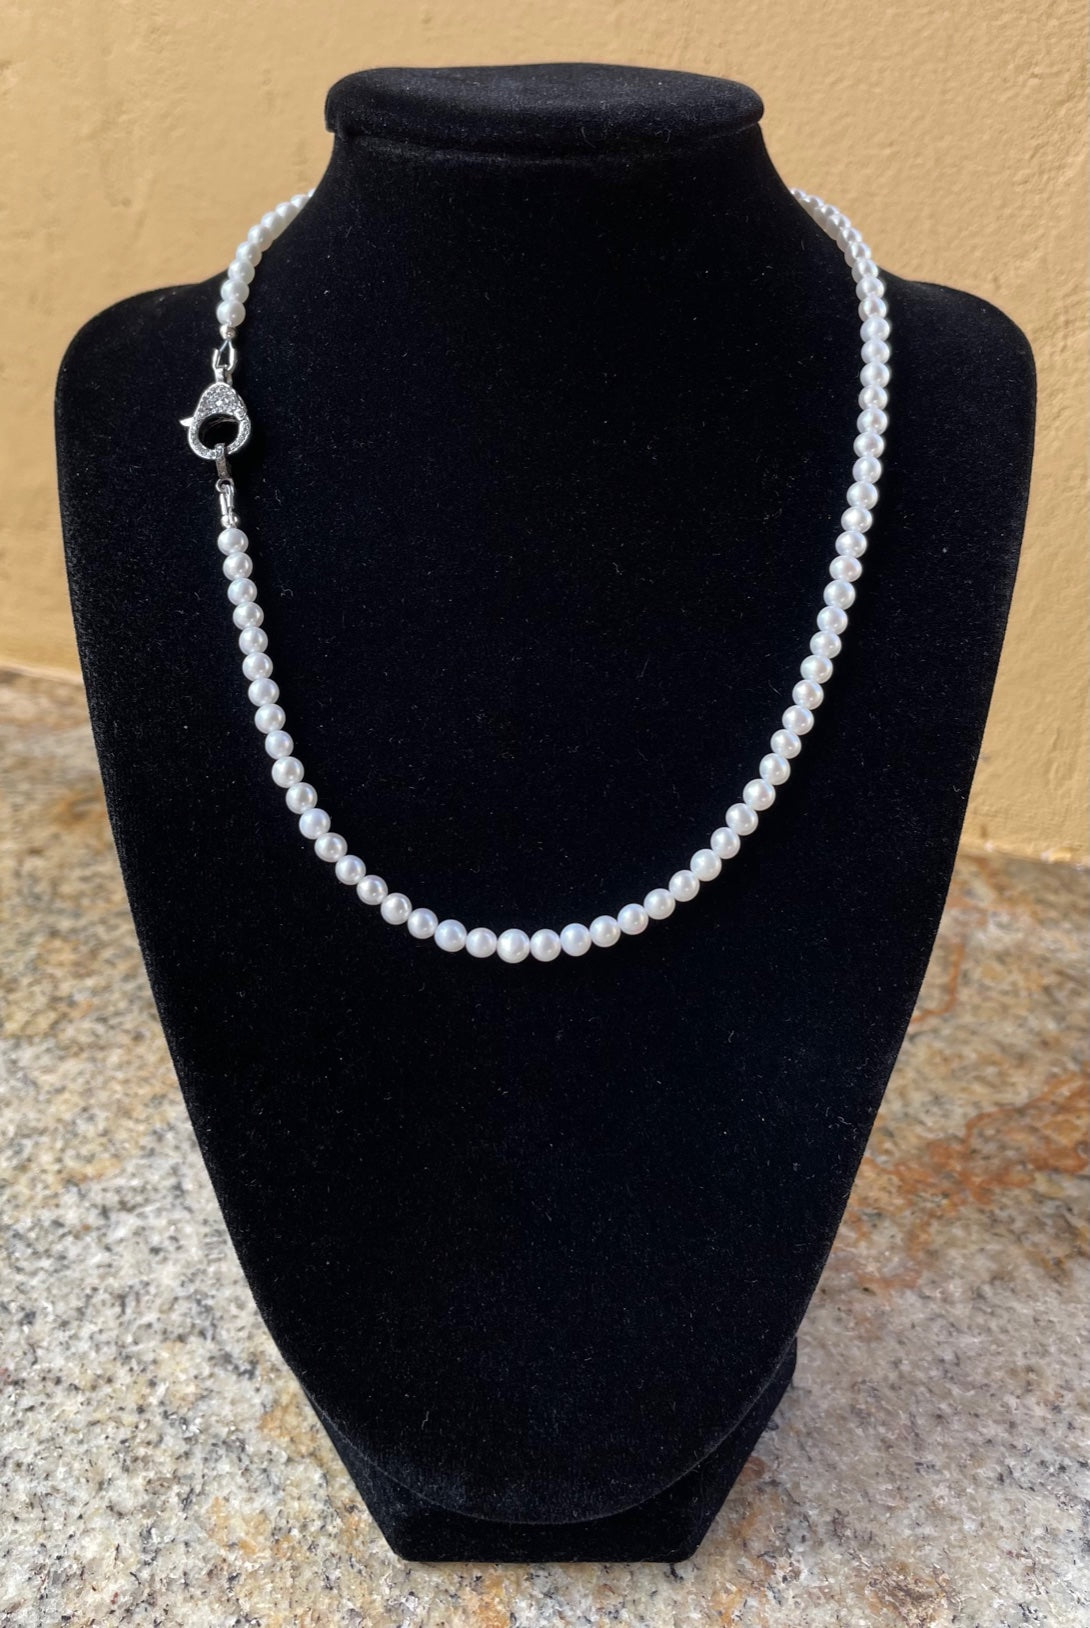 Necklace - 3mm white pearls with anoxidized pave diamond clasp